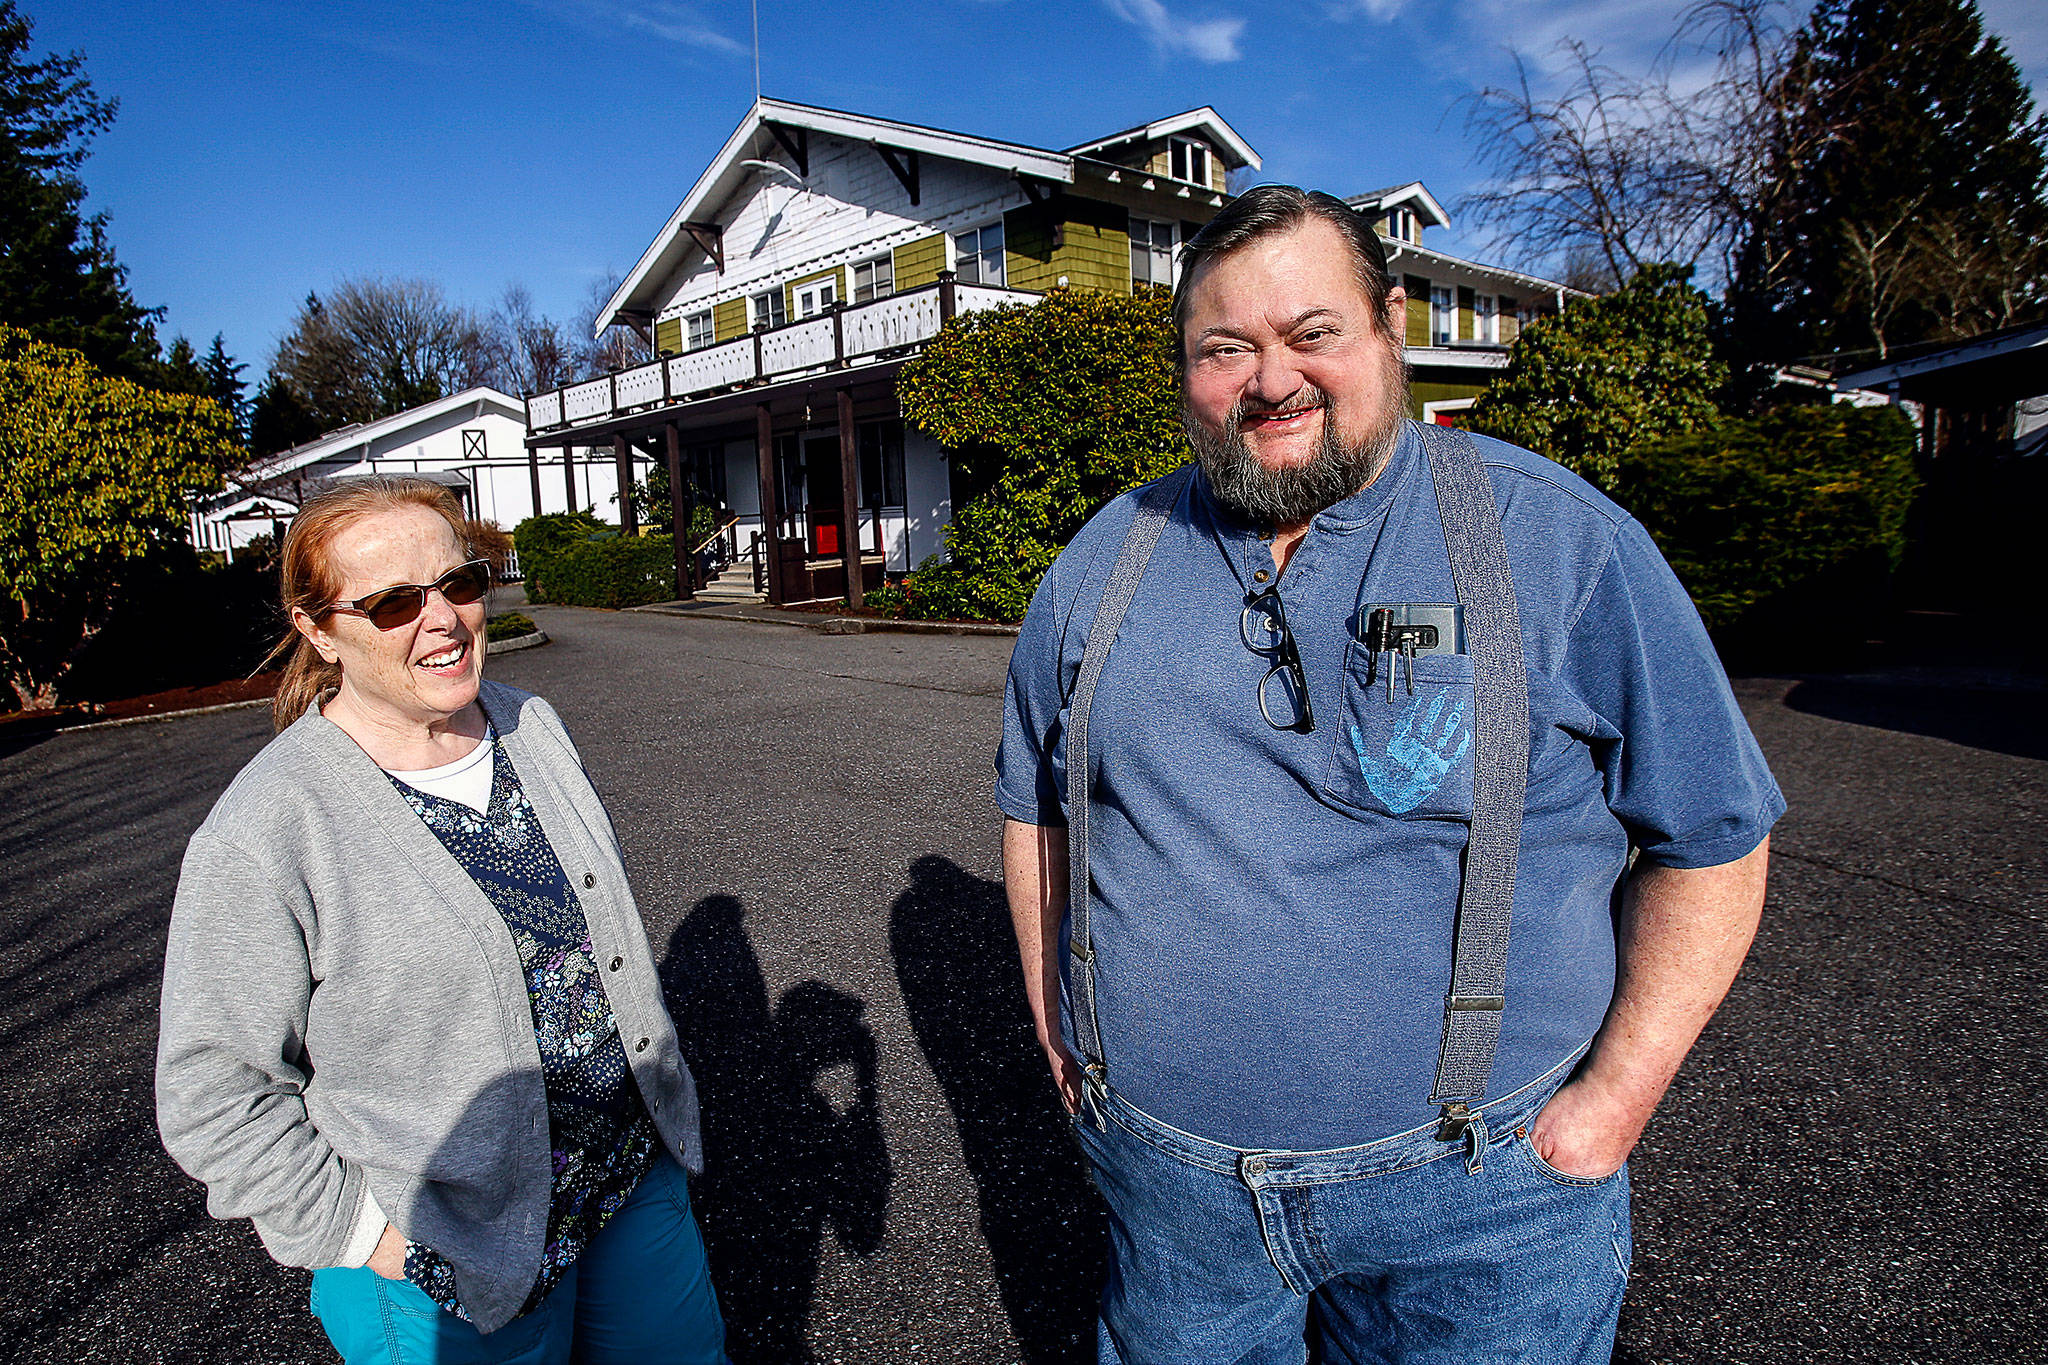 Photos by Dan Bates / The Herald                                Chris Walsh and his wife, Carol, talk outside the Delta Rehabilitation Center about their plans to close the care facility long known as the Snohomish Chalet. Chris is the owner and administrator of the nursing home that cares for people with severe brain injuries. Carol has worked as a nurse there for many years.